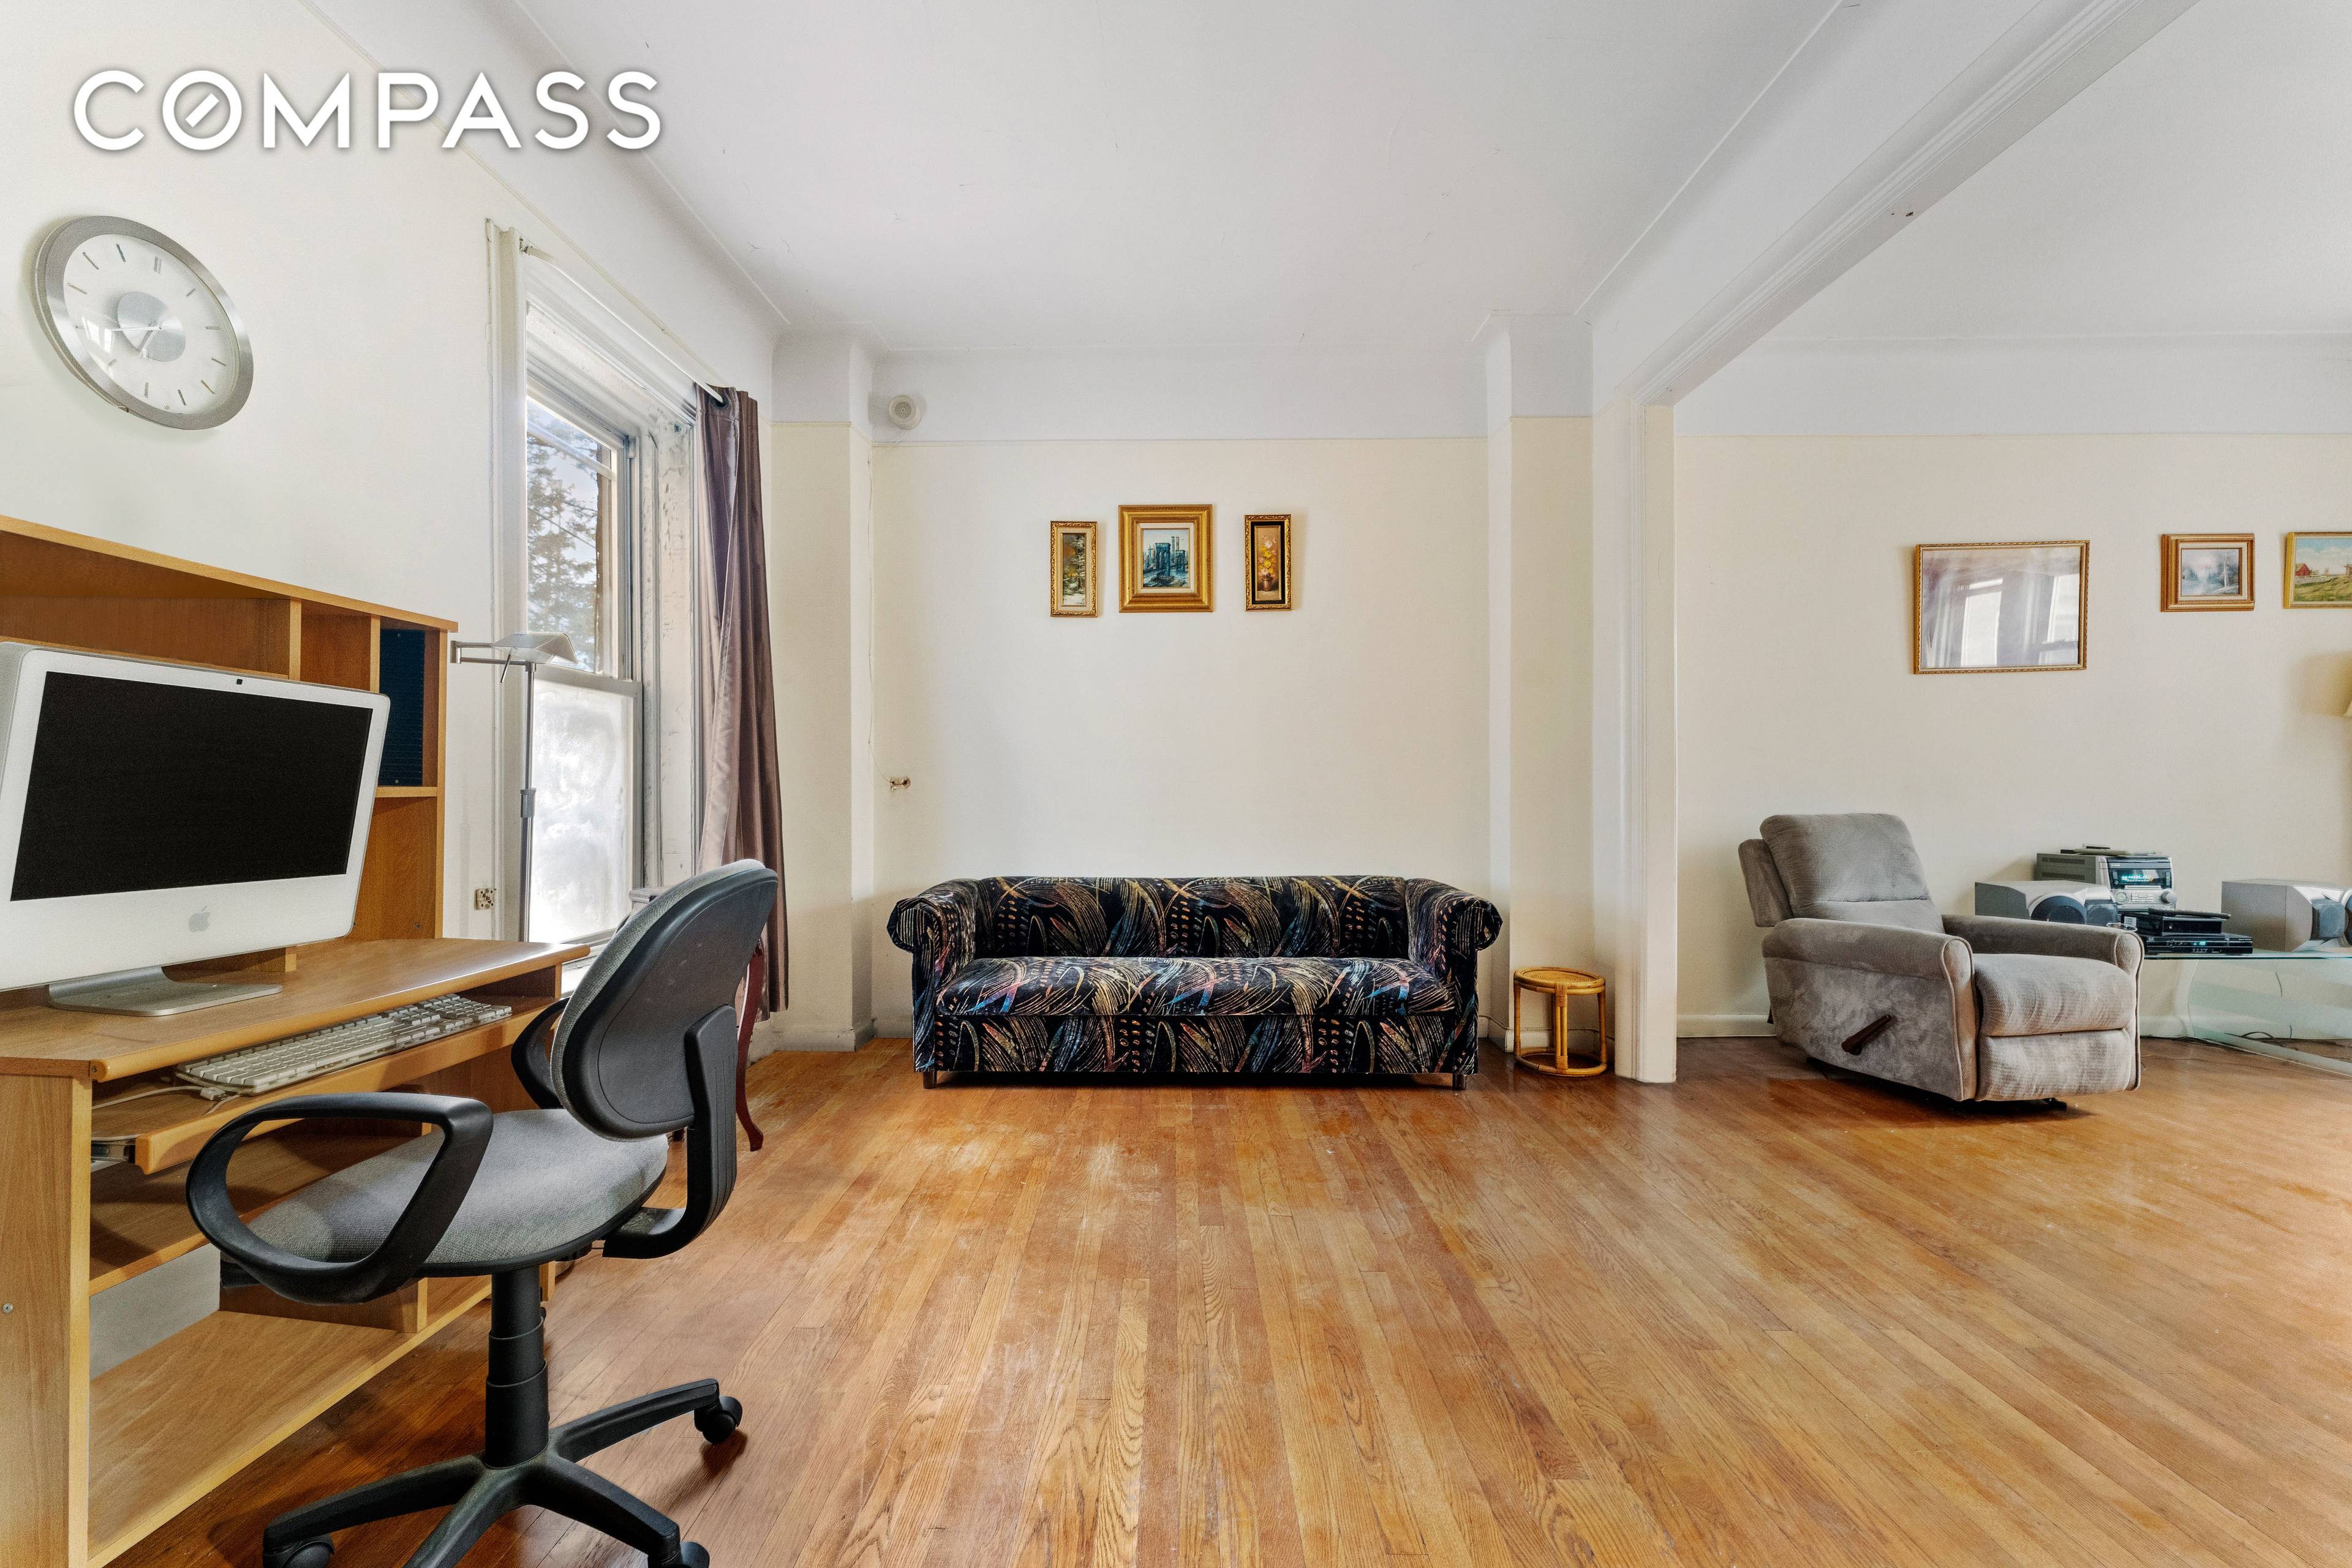 Discover exceptional park side living in this convertible two bedroom, one bathroom residence in a lovely historic cooperative currently set up as a one bedroom.